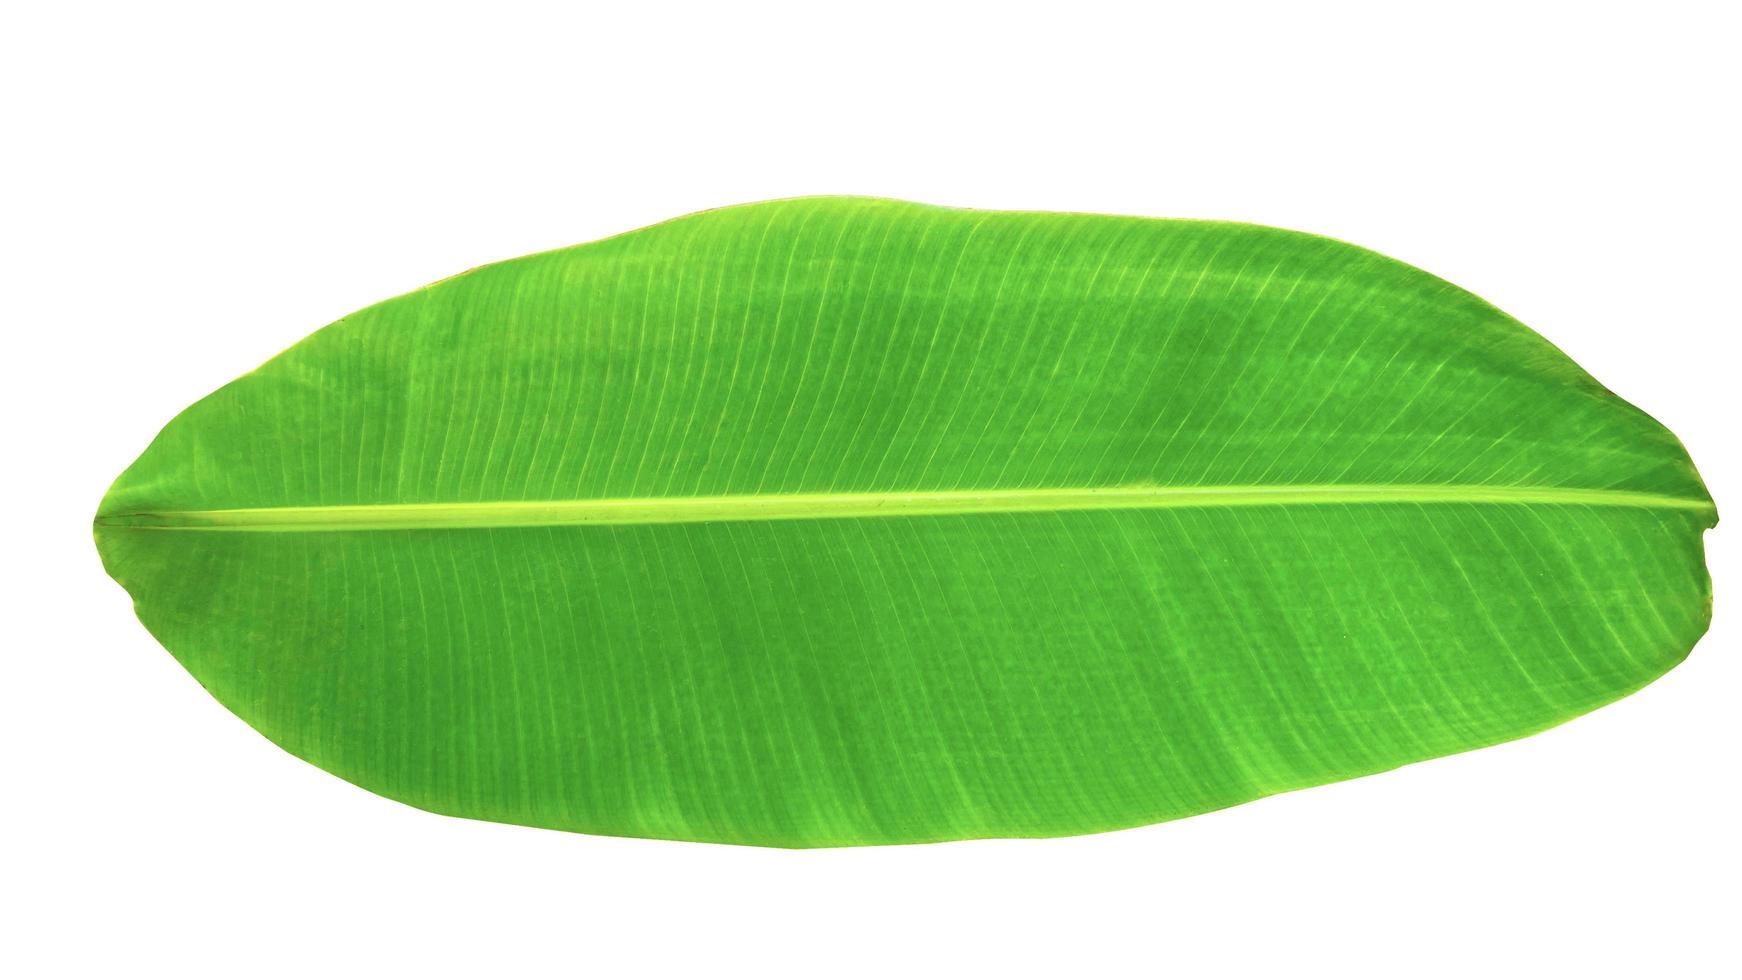 Banana leaf isolated on white background, File contains a clipping path. Concept plant family Musaceae. photo